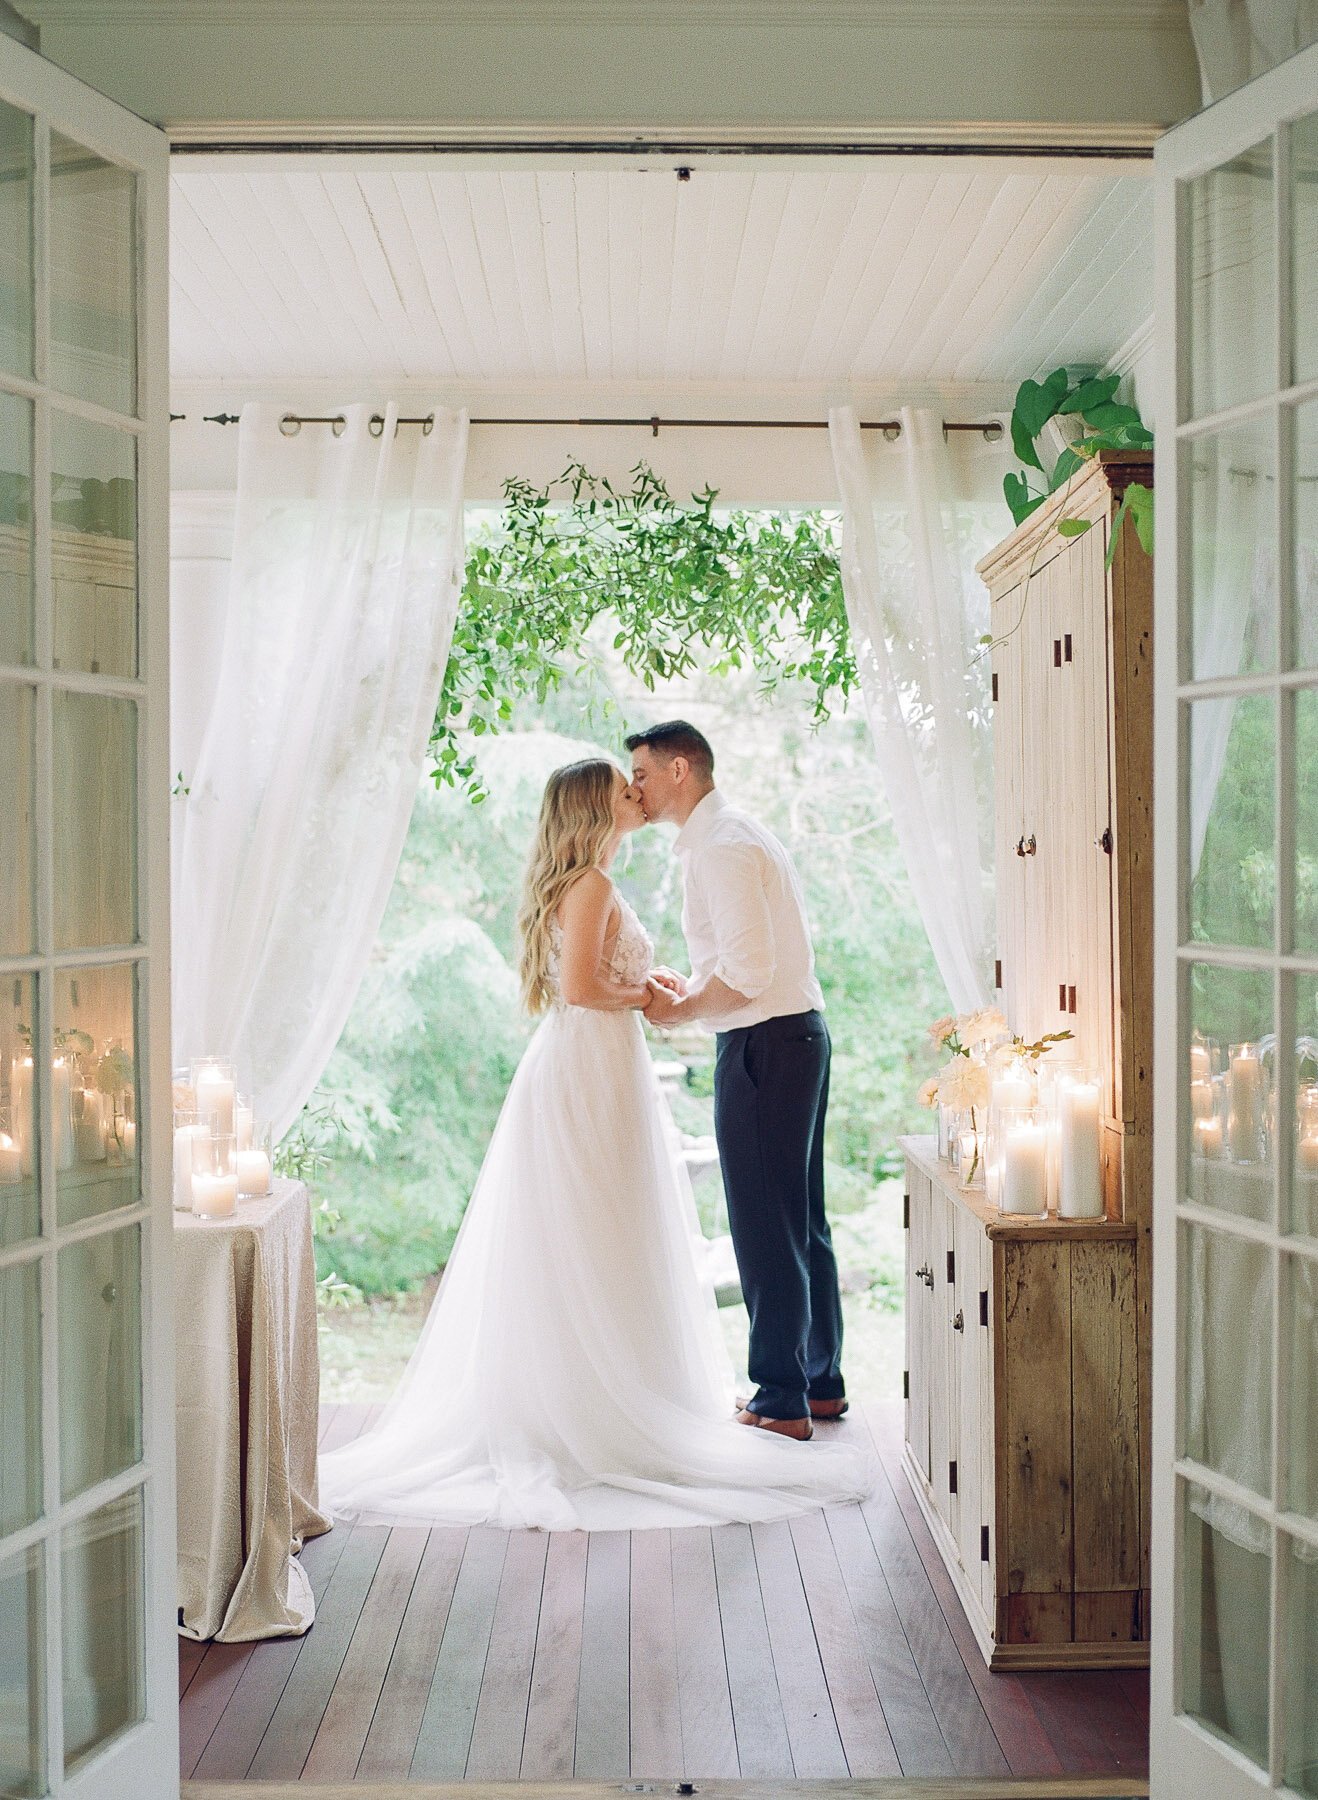 Kelly Strong Intimate Wedding in Upstate NY by Michelle Lange Photography - 52.JPG